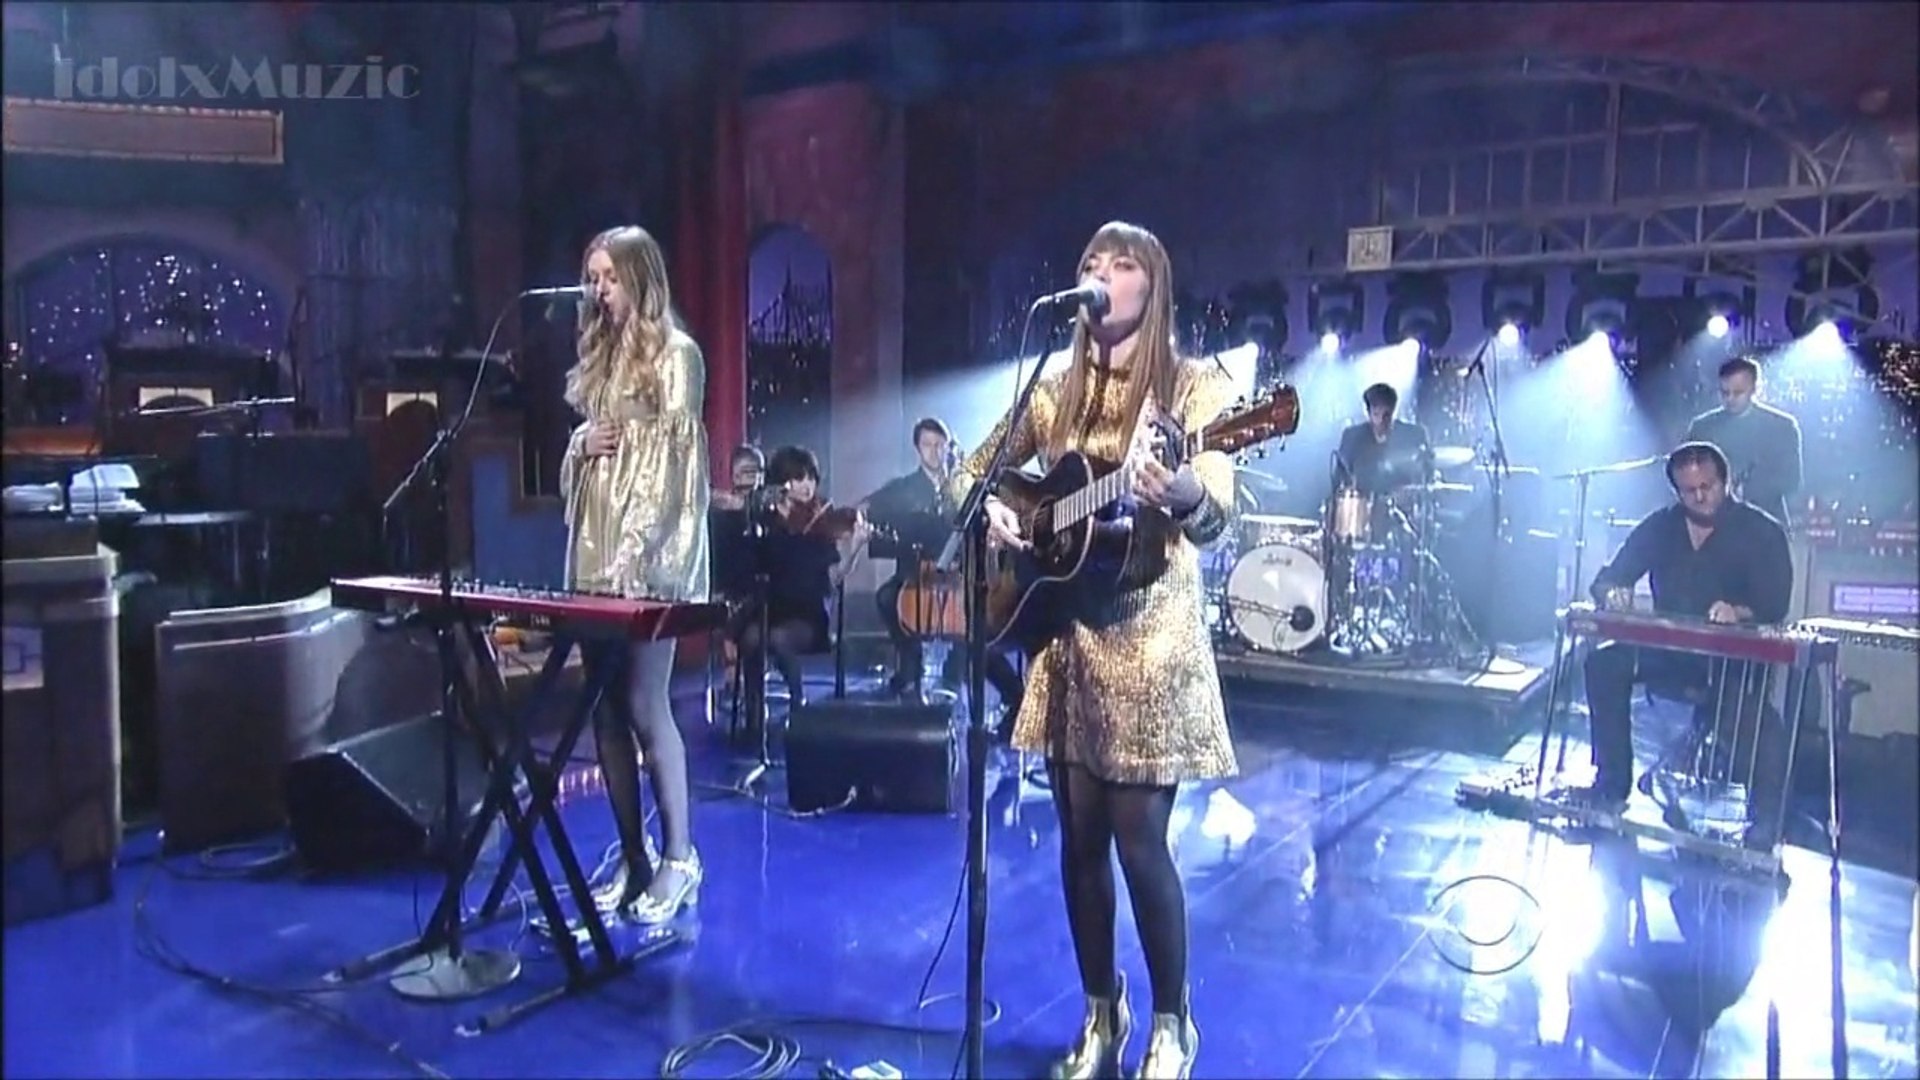 HD] First Aid Kit - My Silver Lining - David Letterman 6-12-14 - video  Dailymotion